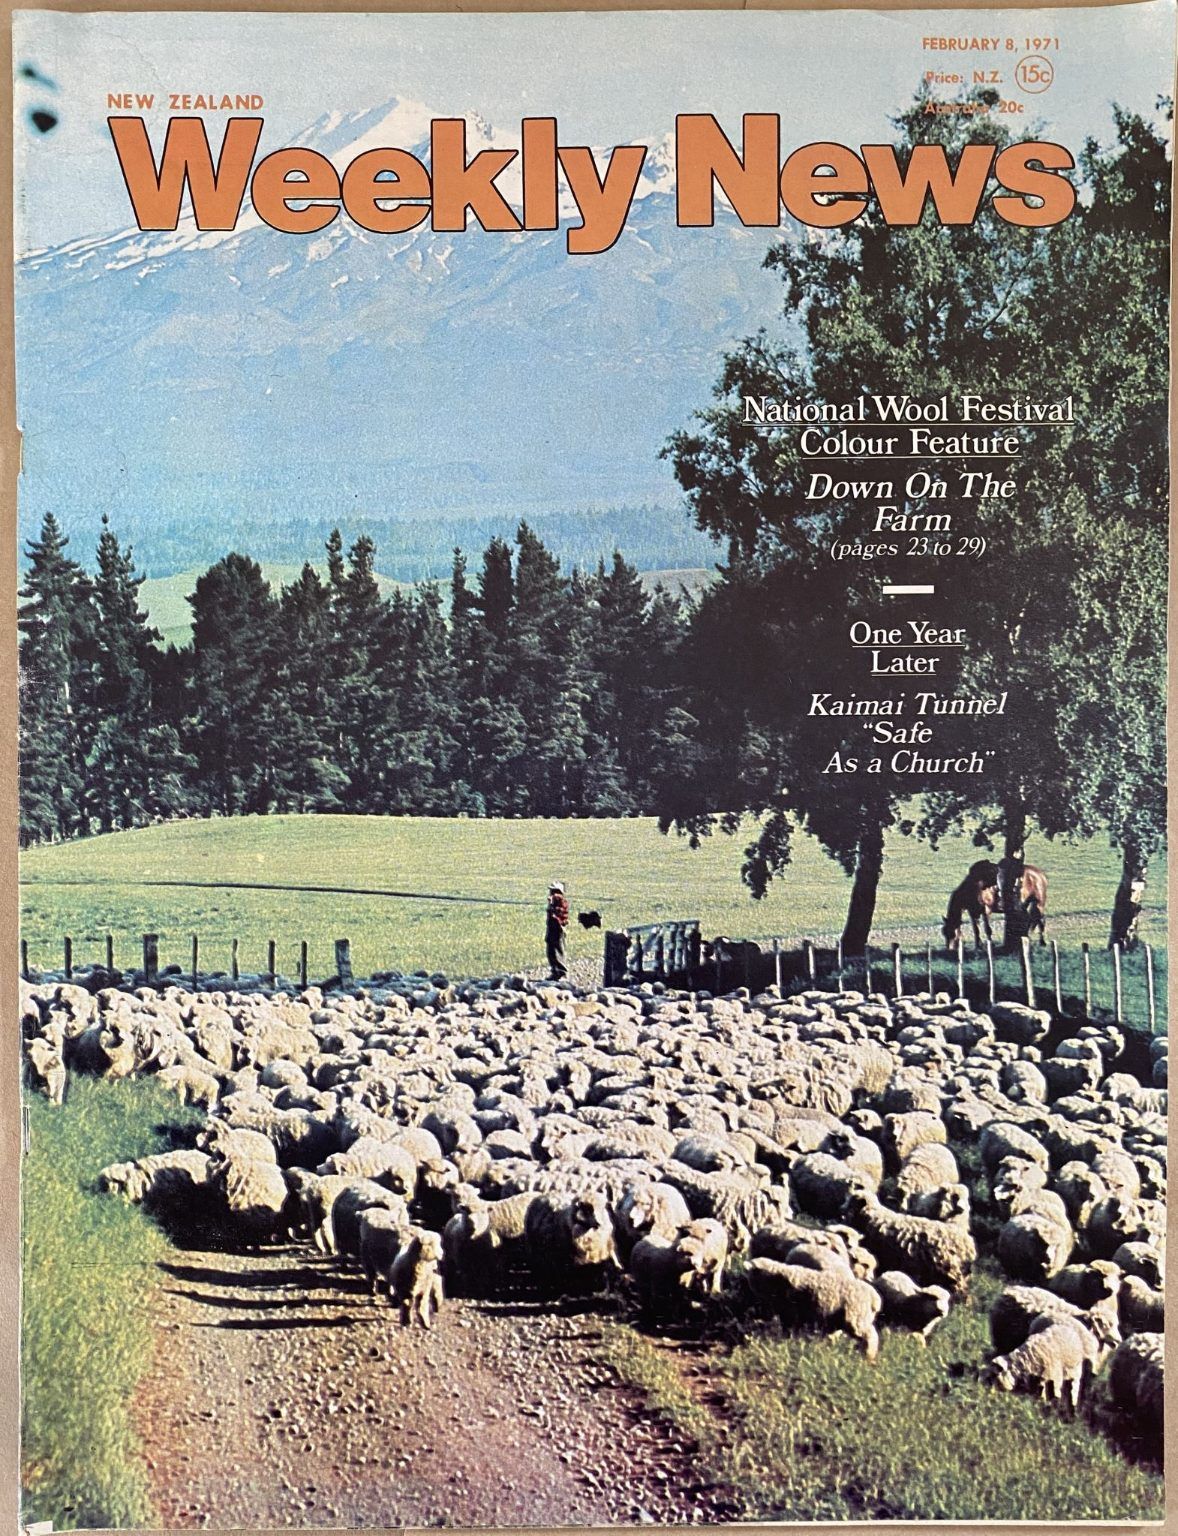 OLD NEWSPAPER: New Zealand Weekly News, No. 5592, 8 February 1971